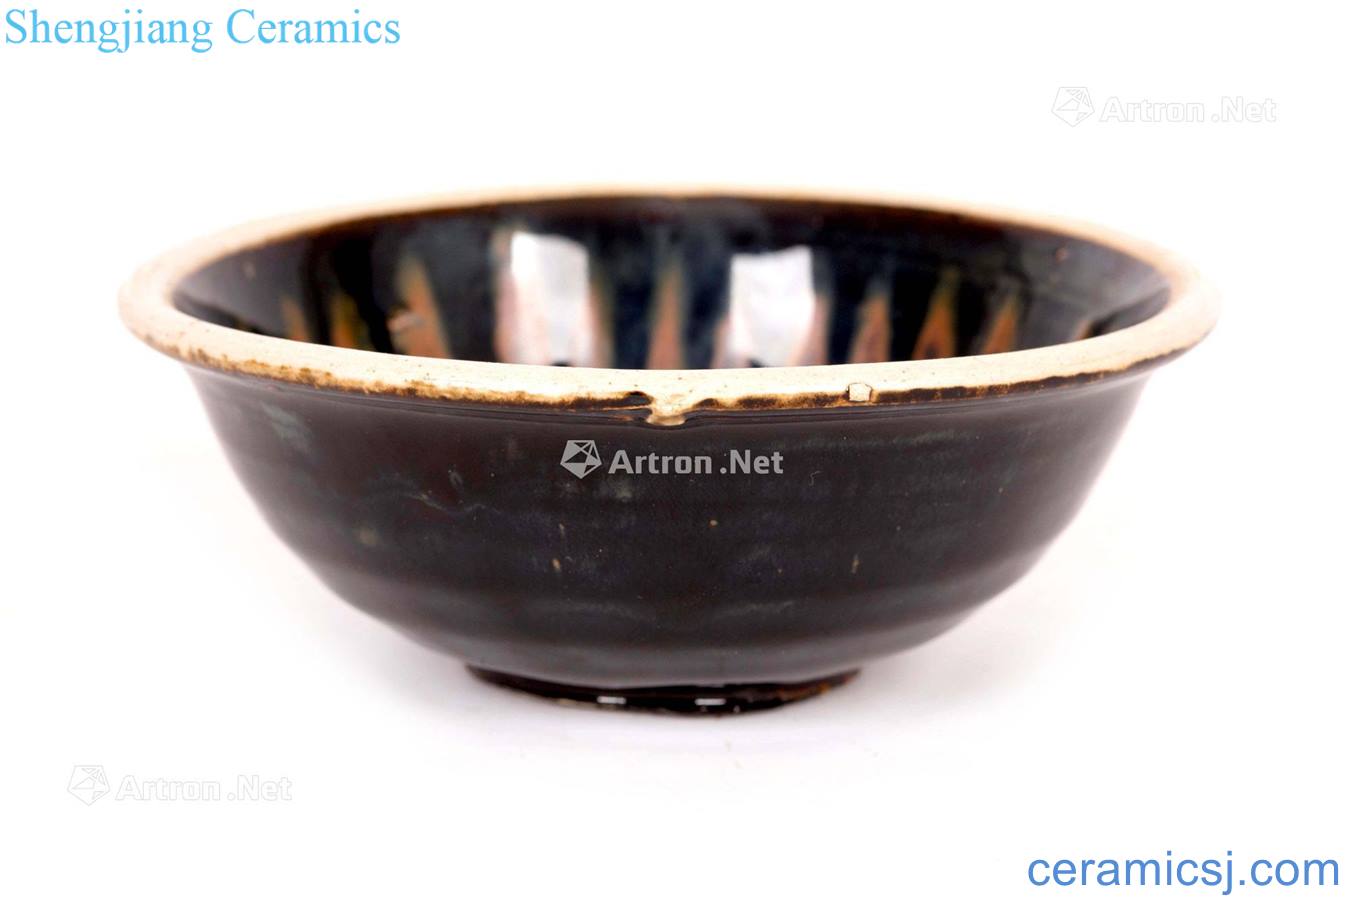 Northern song dynasty white TuHao black glaze bowls